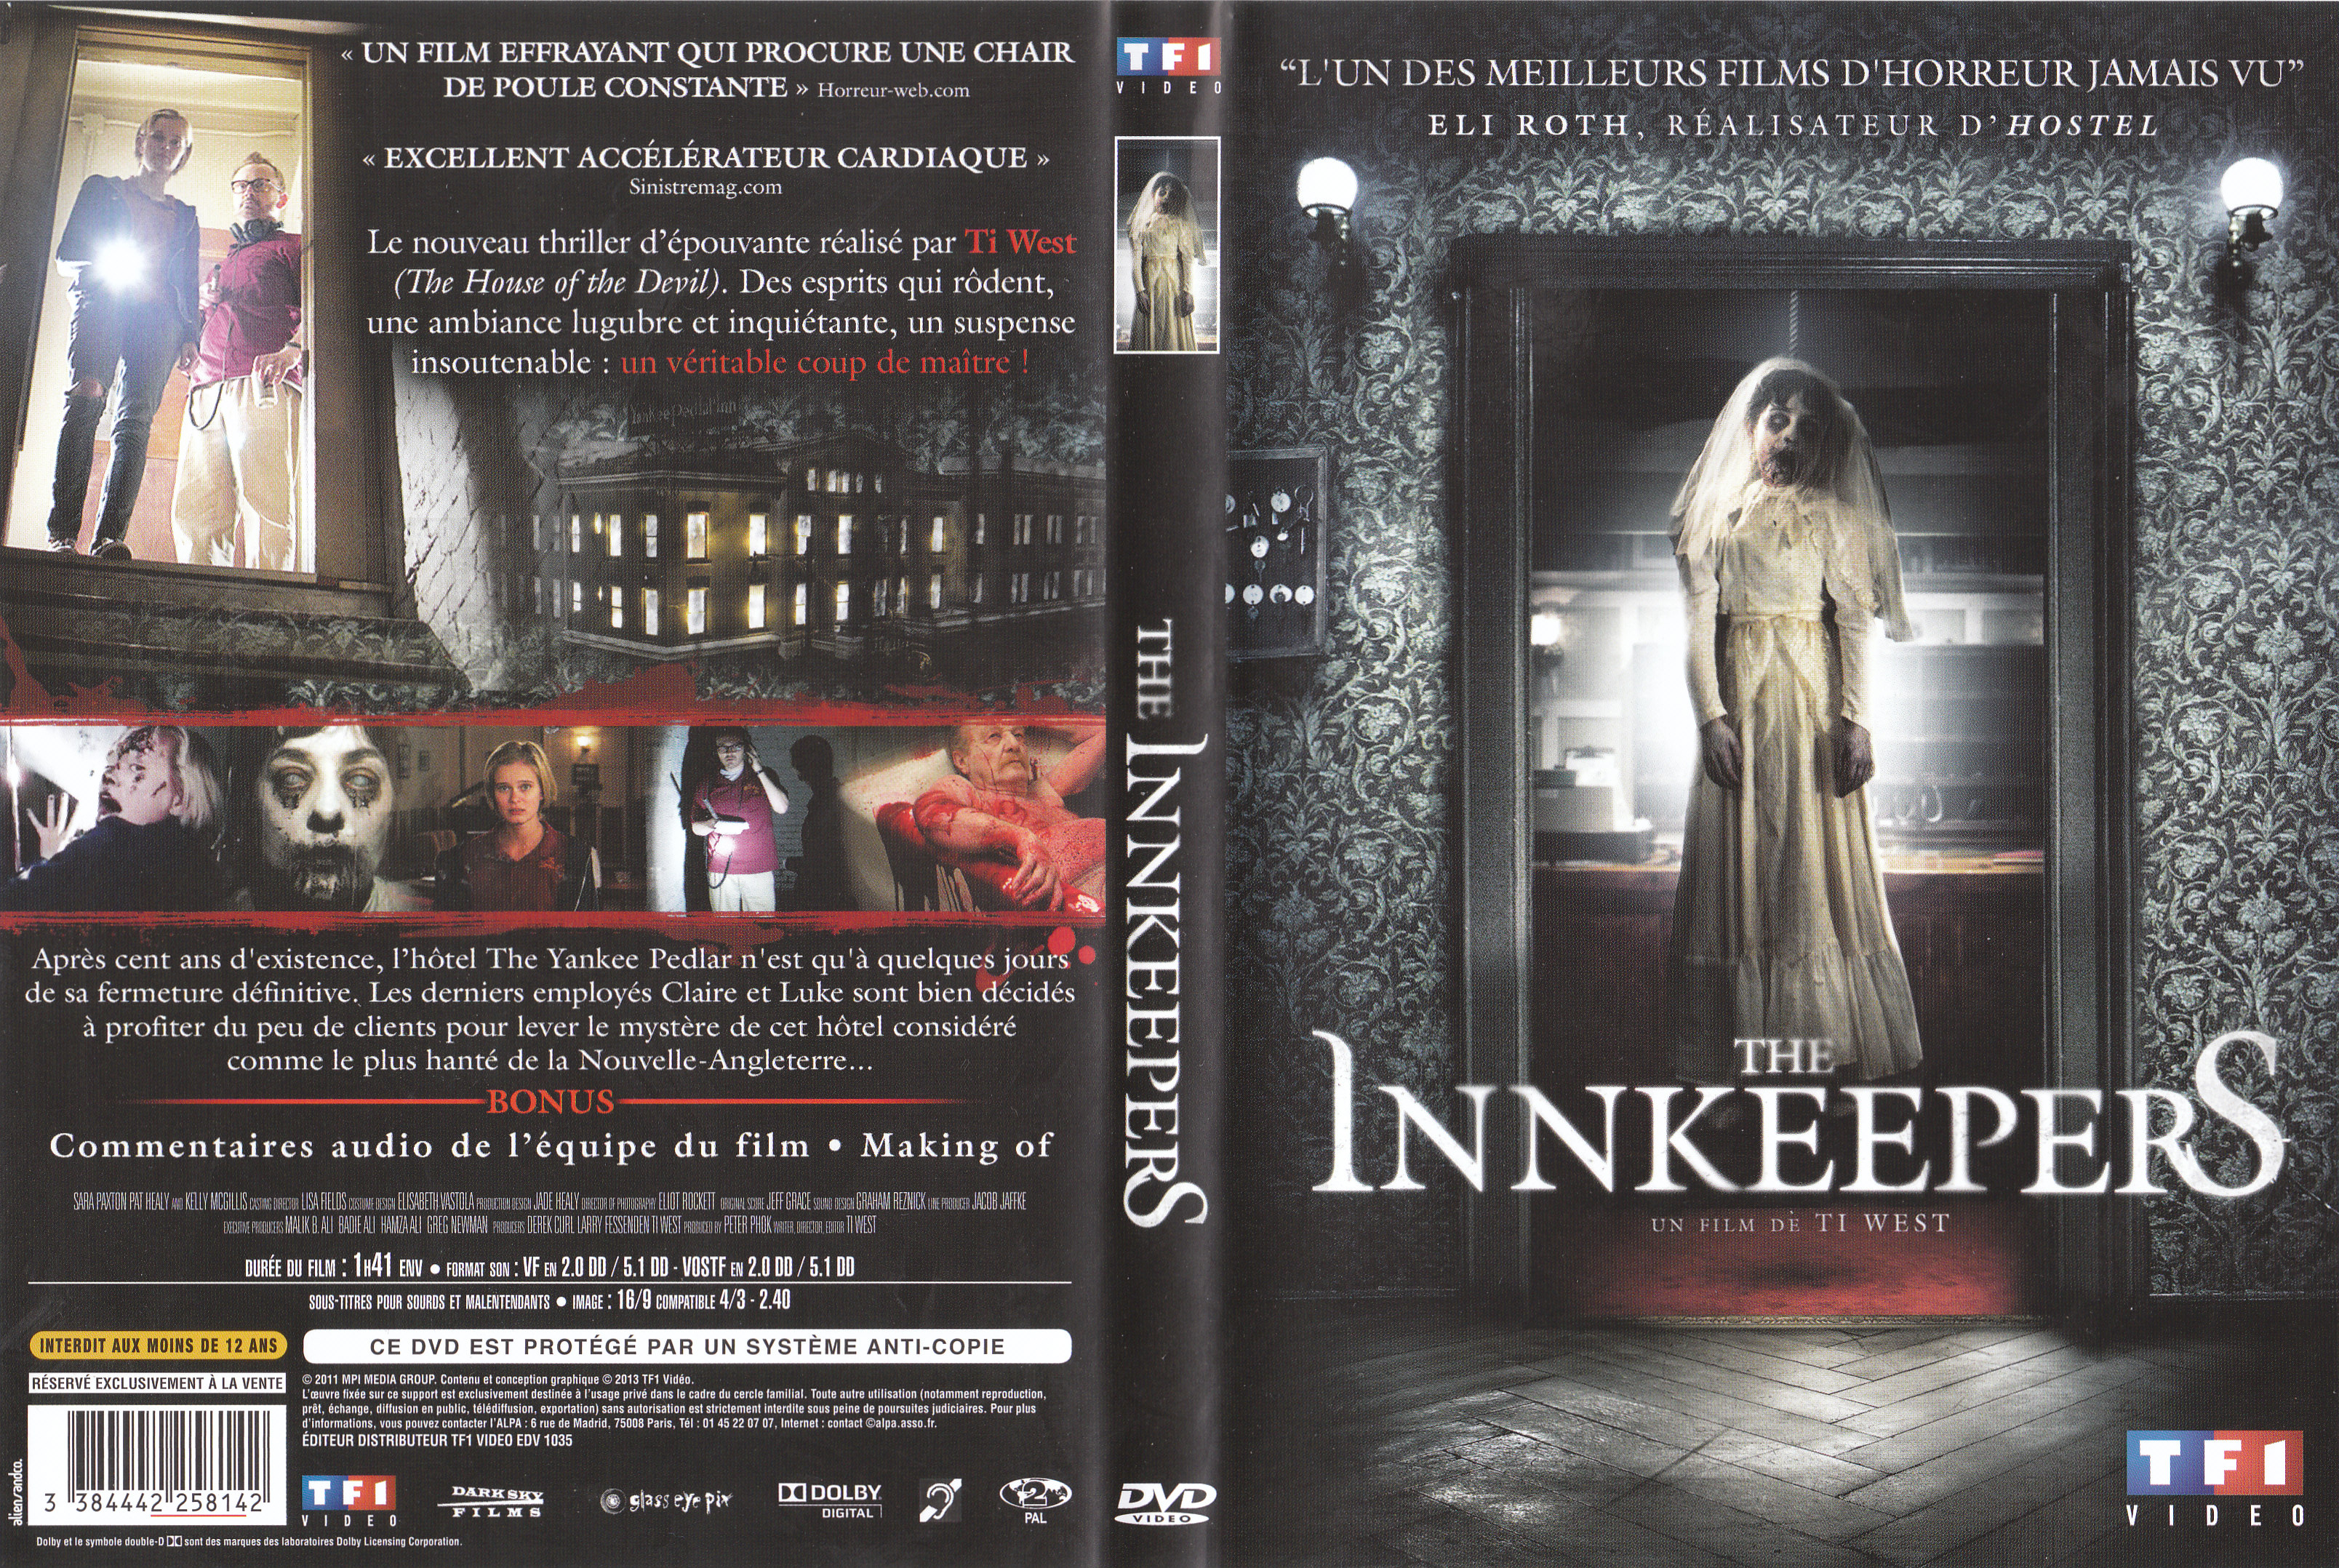 Jaquette DVD The Innkeepers